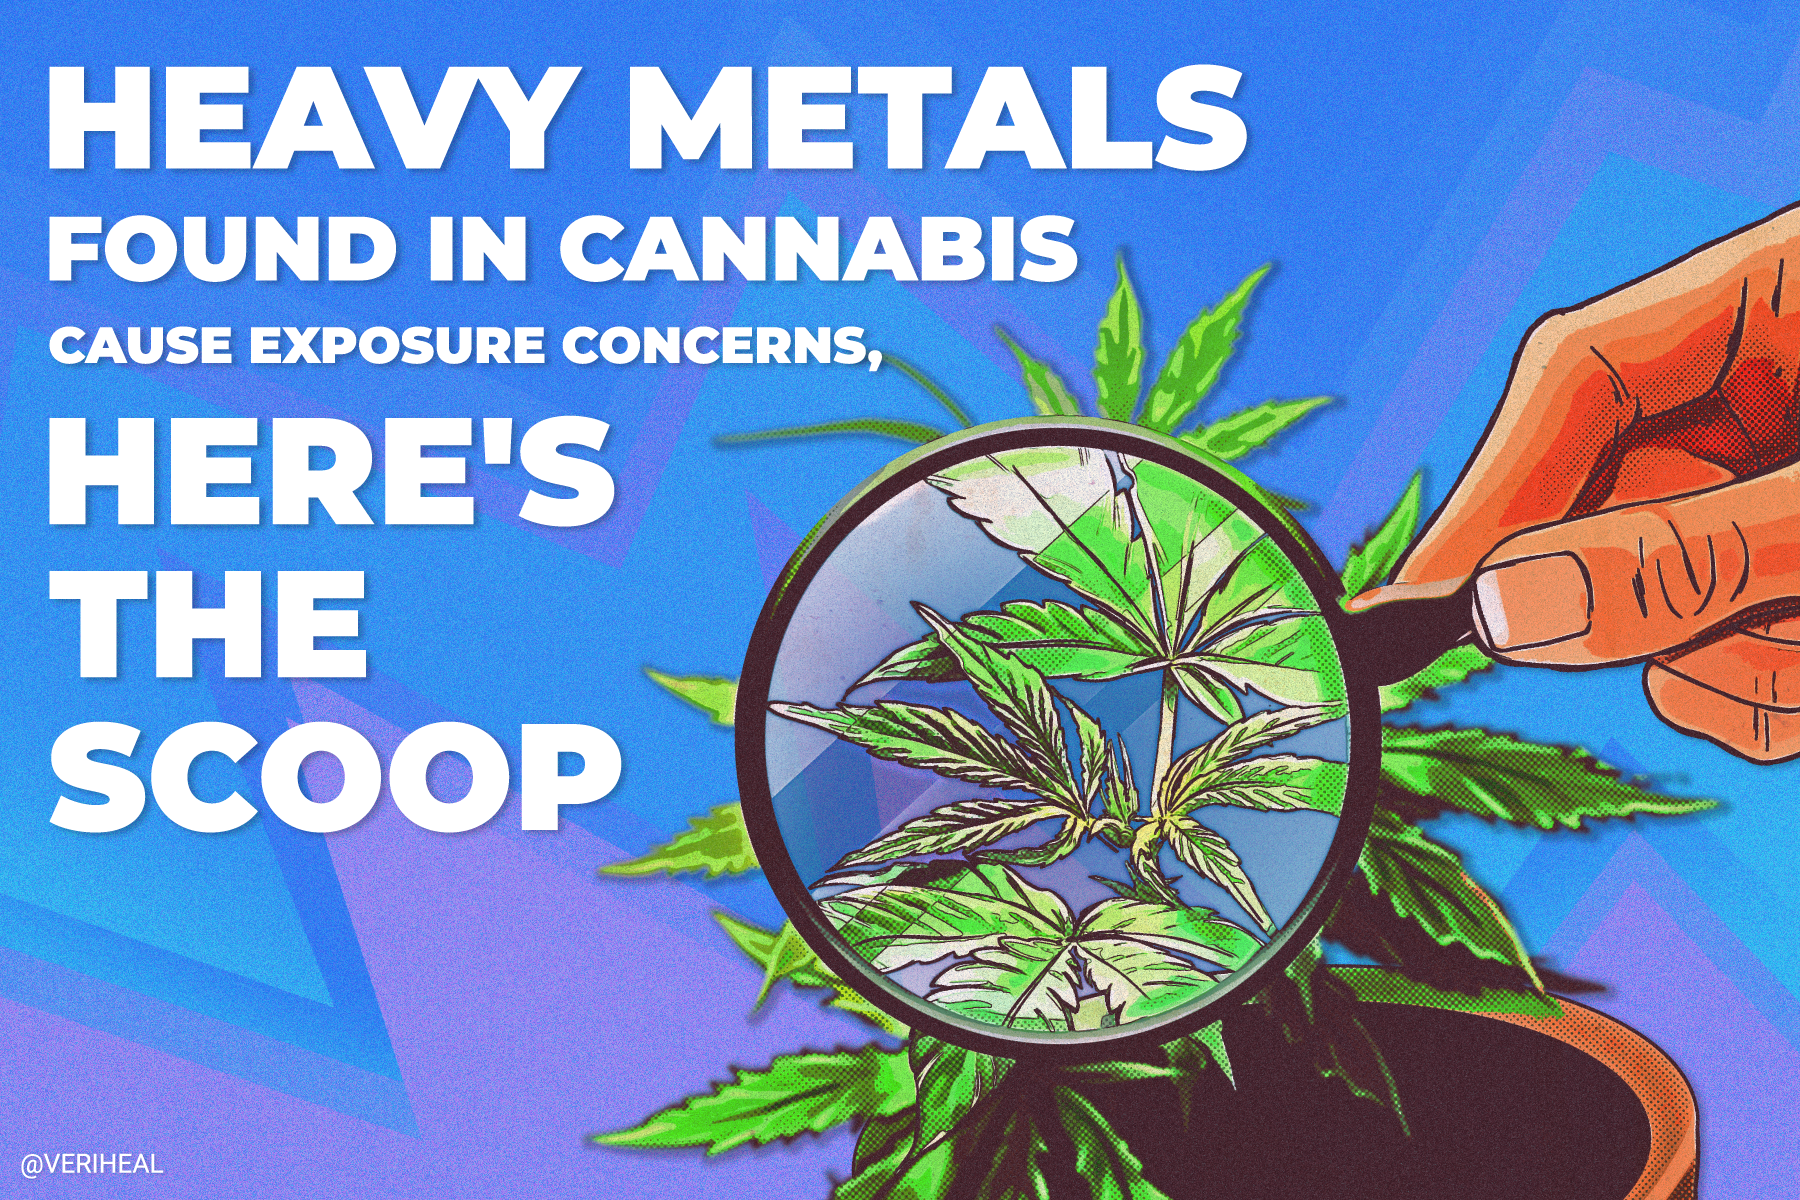 Heavy Metals Found in Cannabis Cause Exposure Concerns—Here’s the Scoop